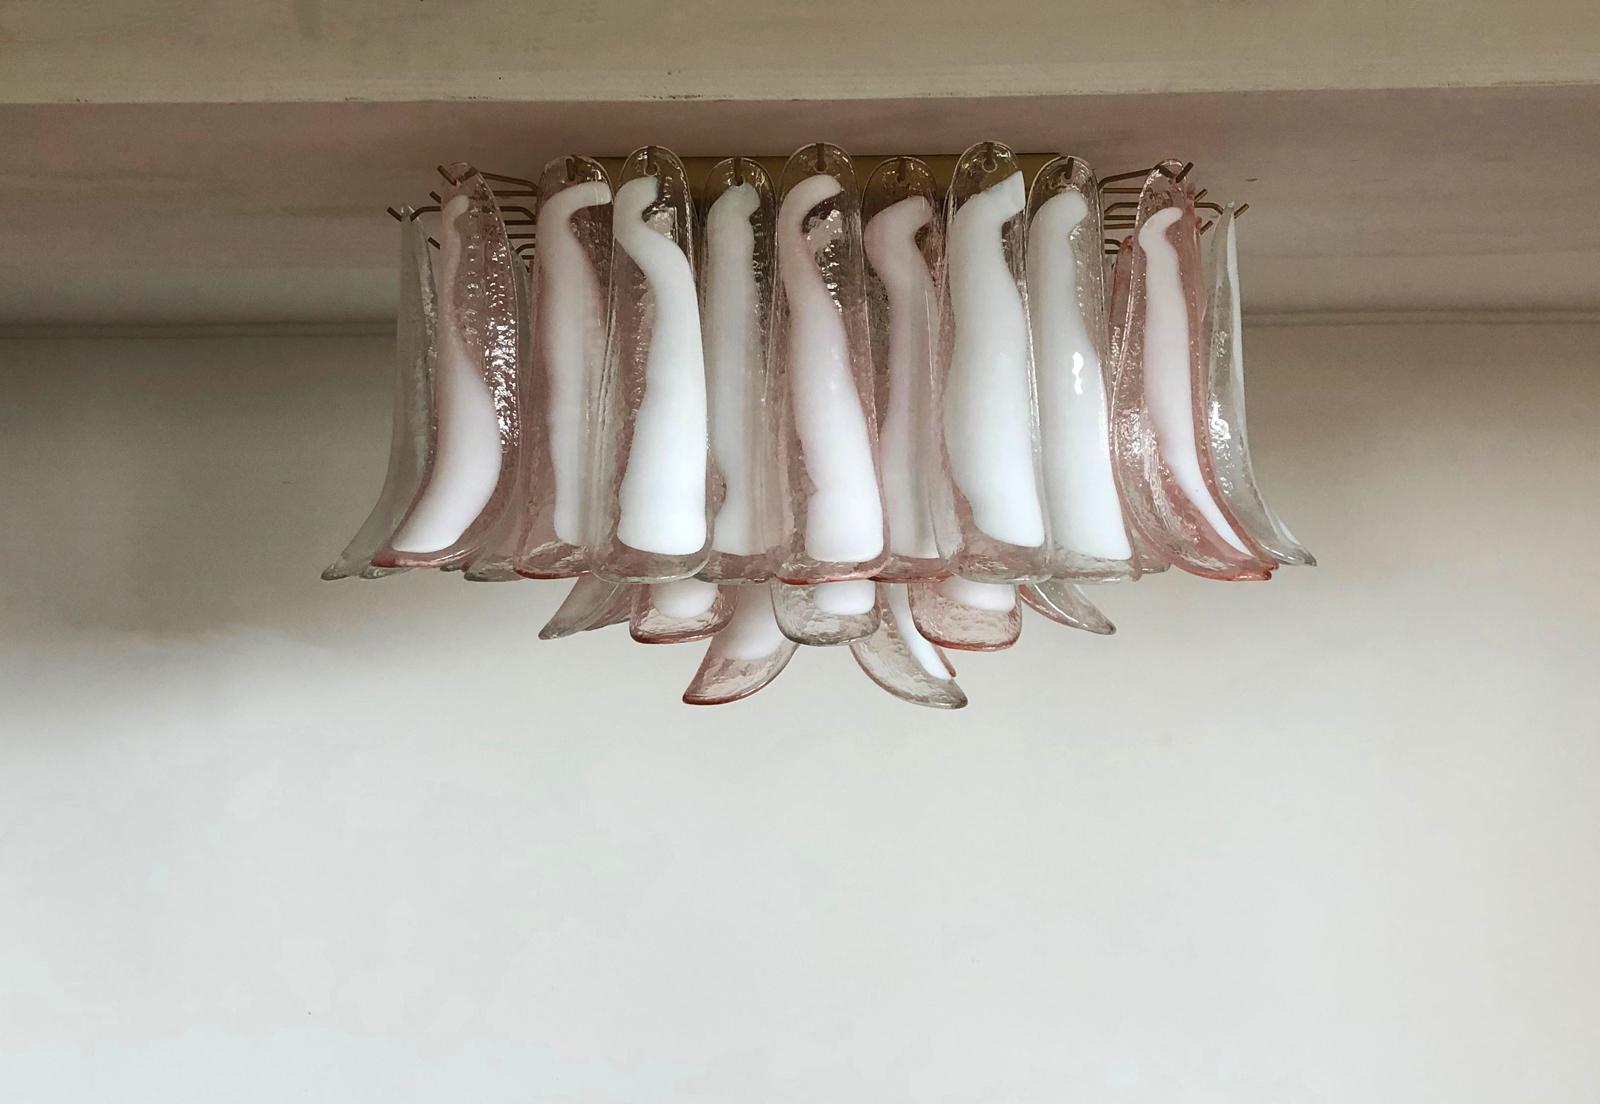 Spectacular ceiling lamp with 64 Murano glasses. The glasses have two different colors, half are transparent with white spots and half are pink with white spots. Elegant lighting object.
Period: Late 20th century
Dimensions: 15.75 inches (40 cm)